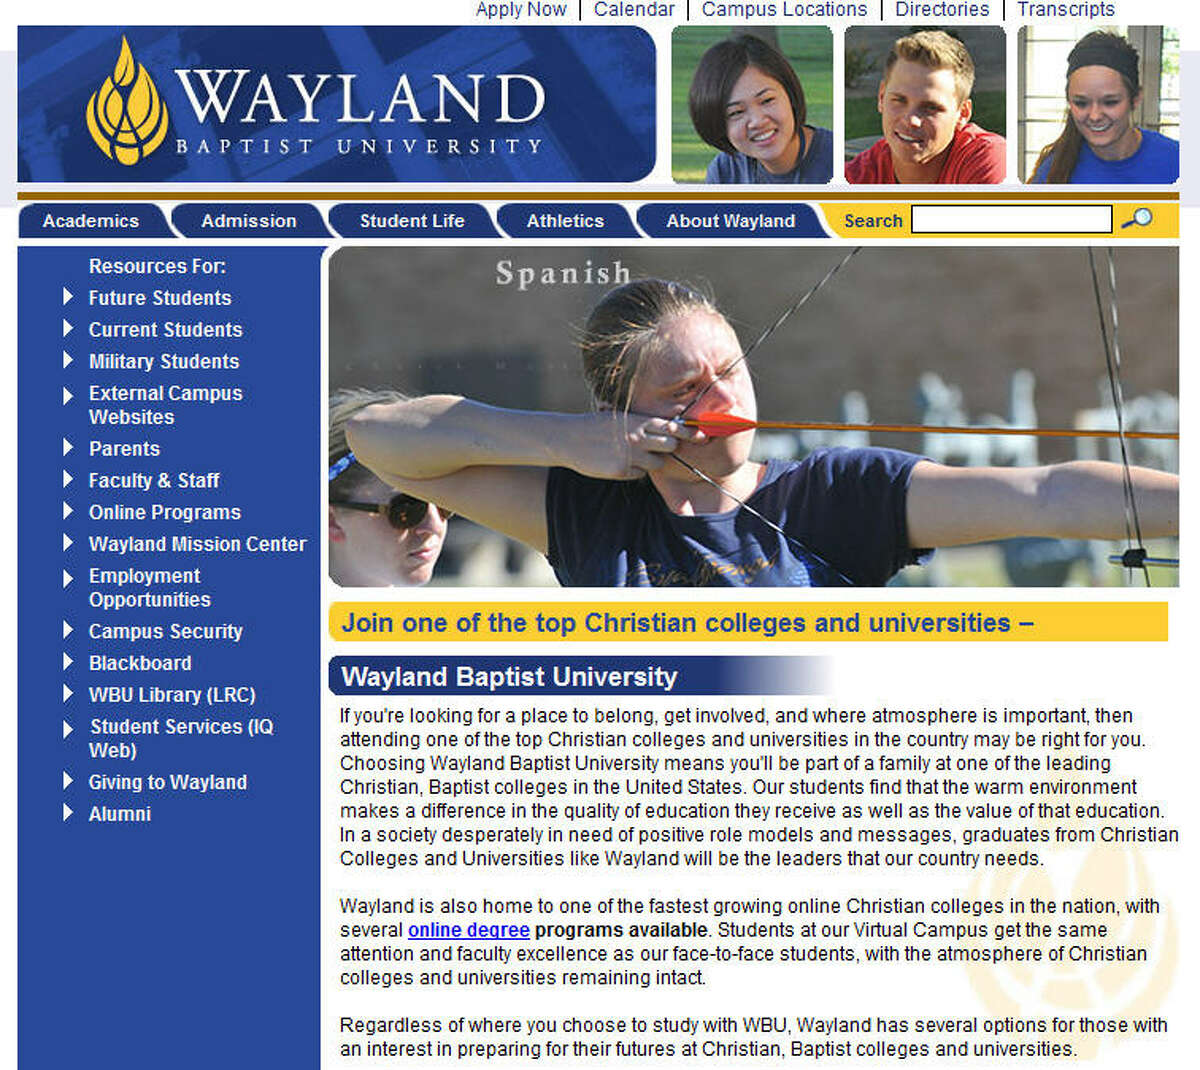 19. Wayland Baptist University 2013 cost: $90,06020-year return of investment: $344,300Graduation rate: 36 percentSource: Pay Scale